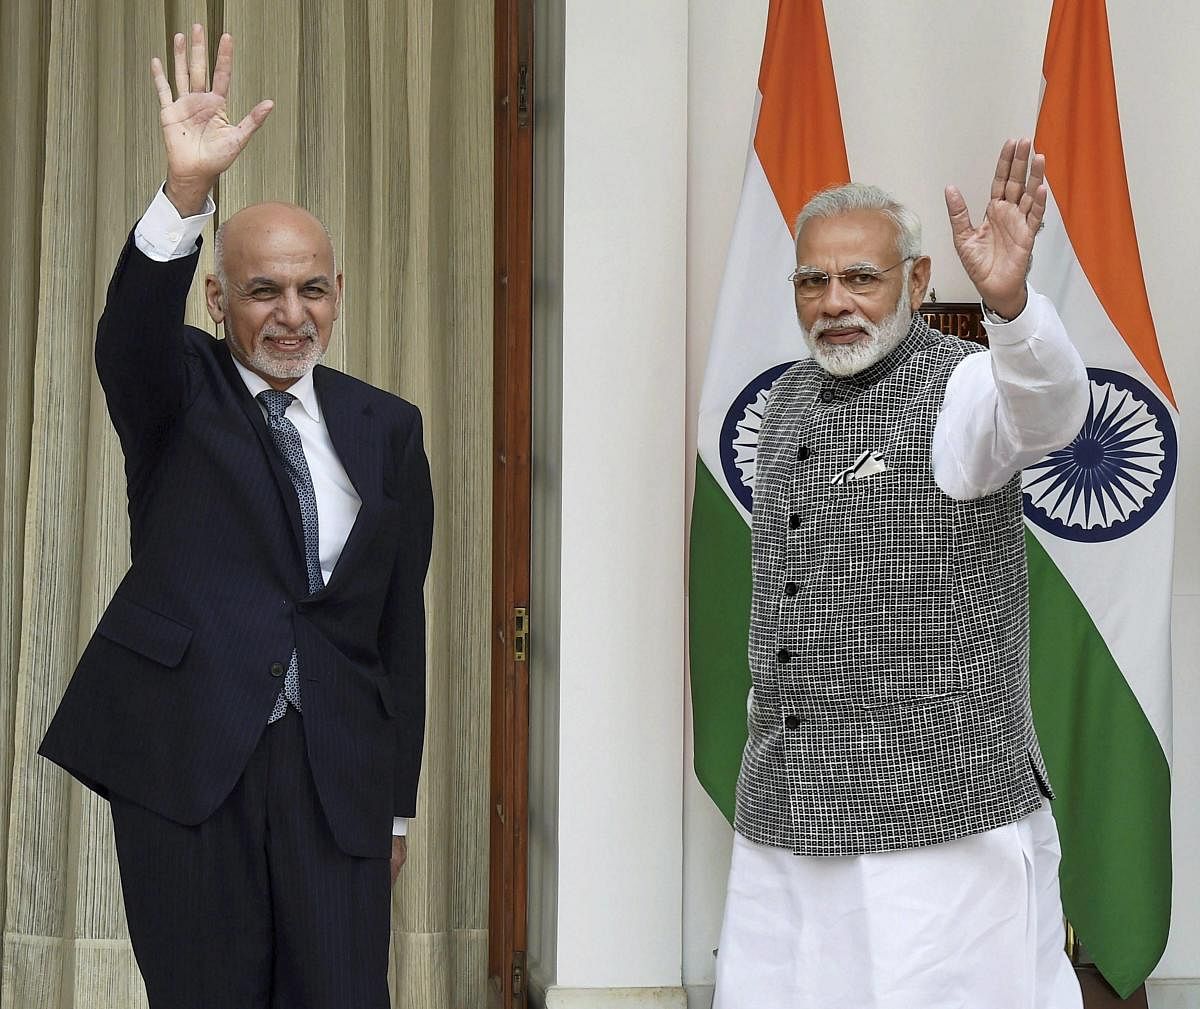 Prime Minister Narendra Modi and the President of the Islamic Republic of Afghanistan, Mohammad Ashraf Ghani